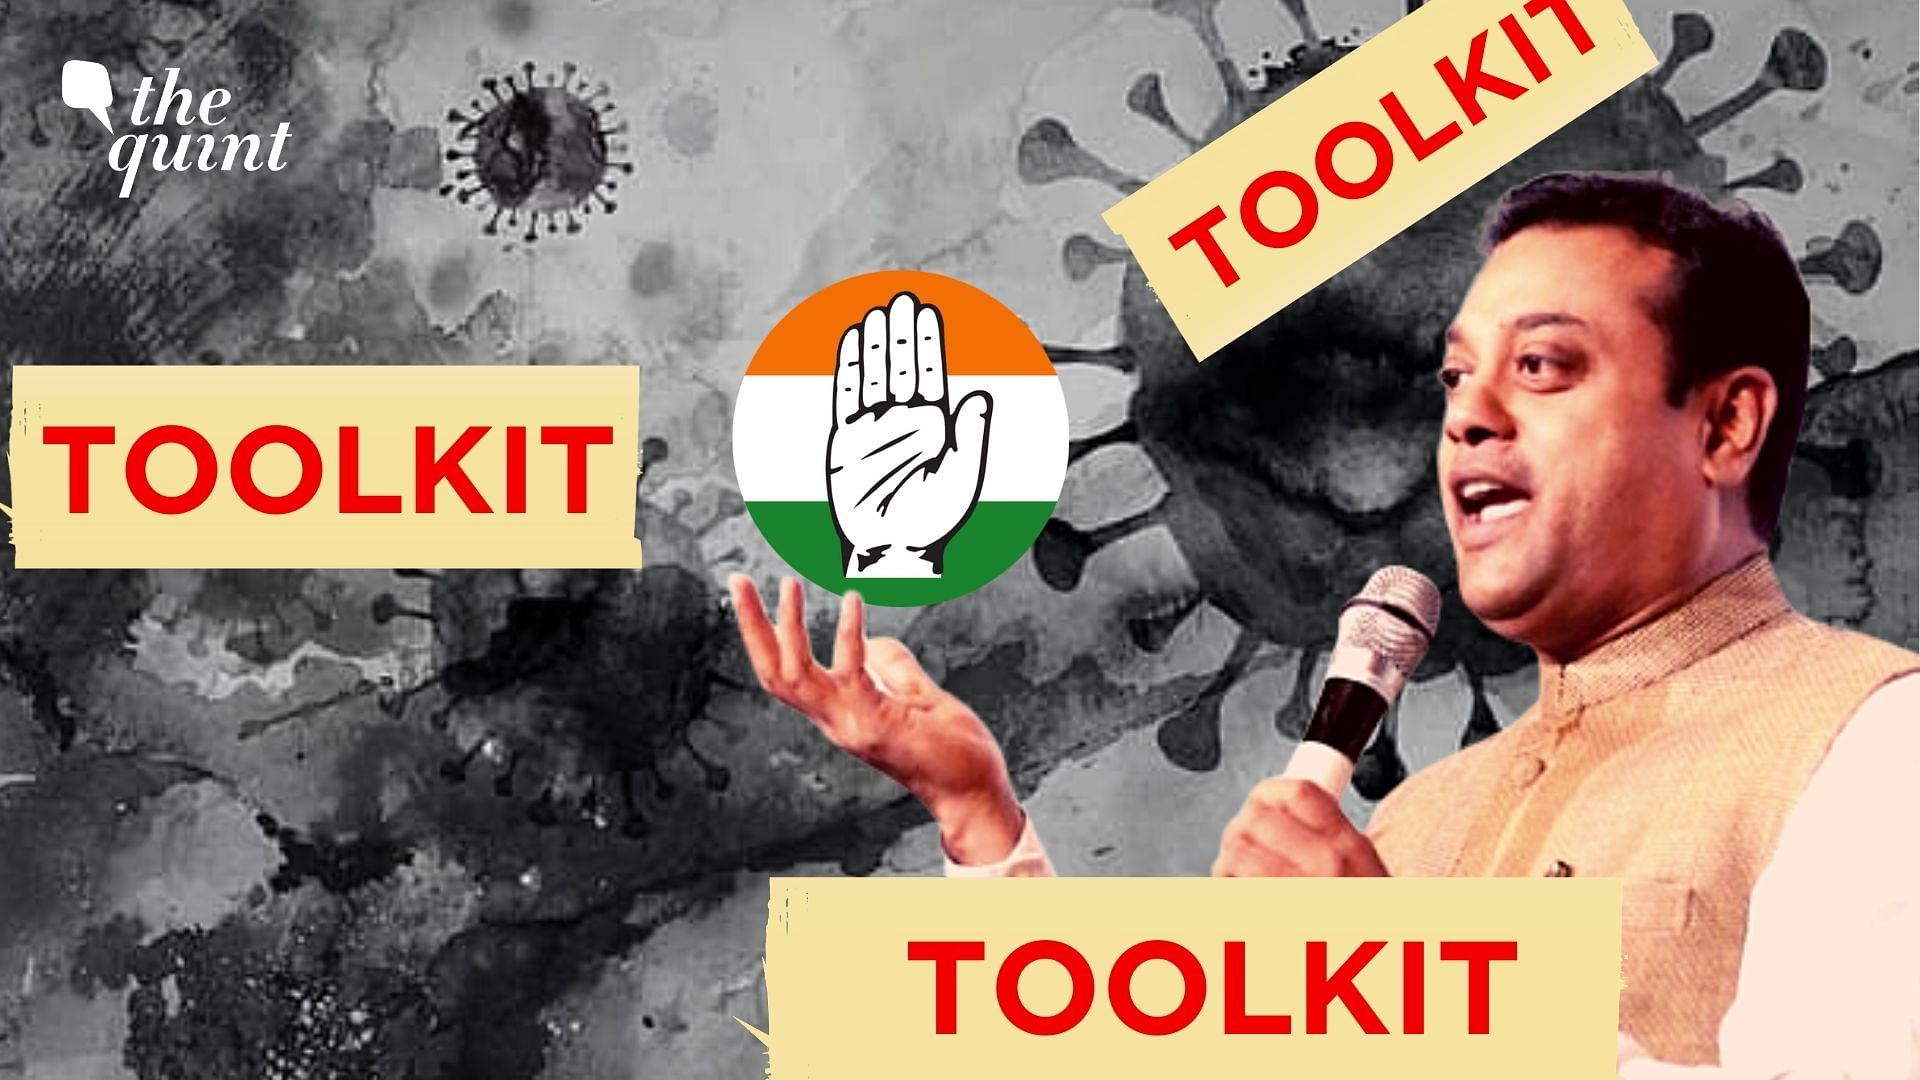 In yet another “toolkit” controversy, the Bharatiya Janata Party, on Tuesday, 18 May, hit out at Congress.